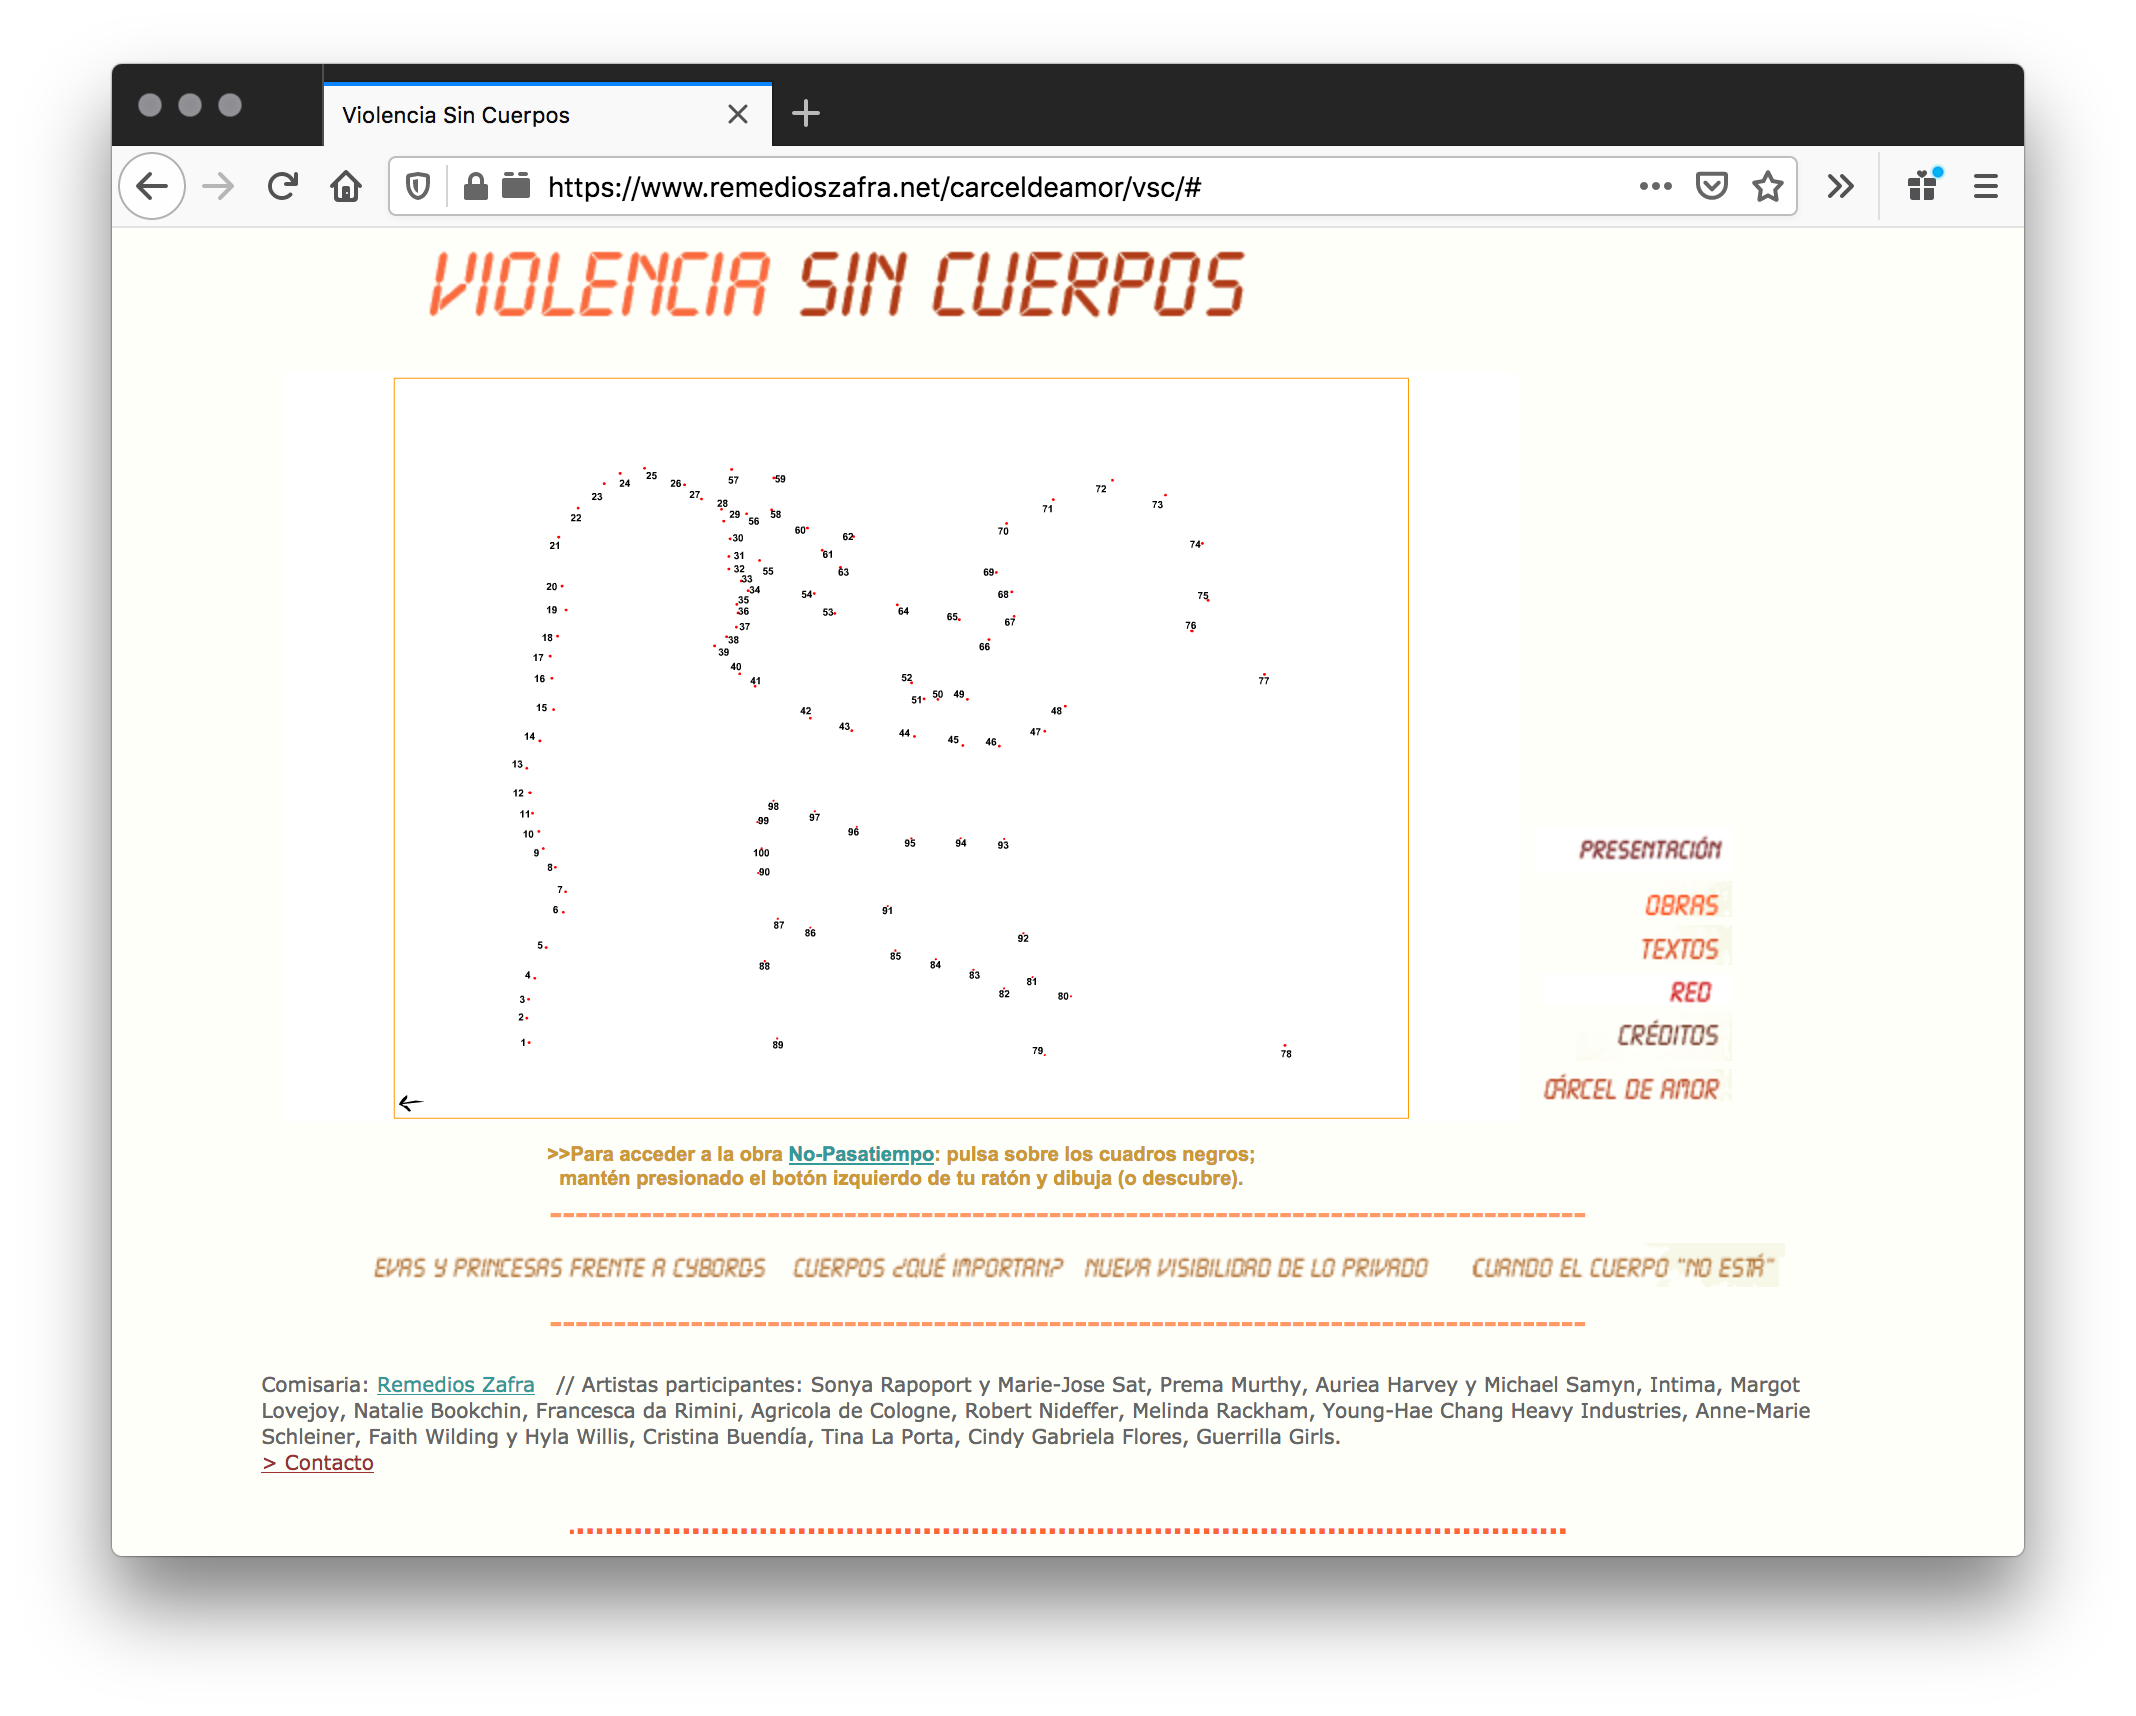 Screenshot of Violencia Sin Cuerpos has a white background and a connect-the-dots image